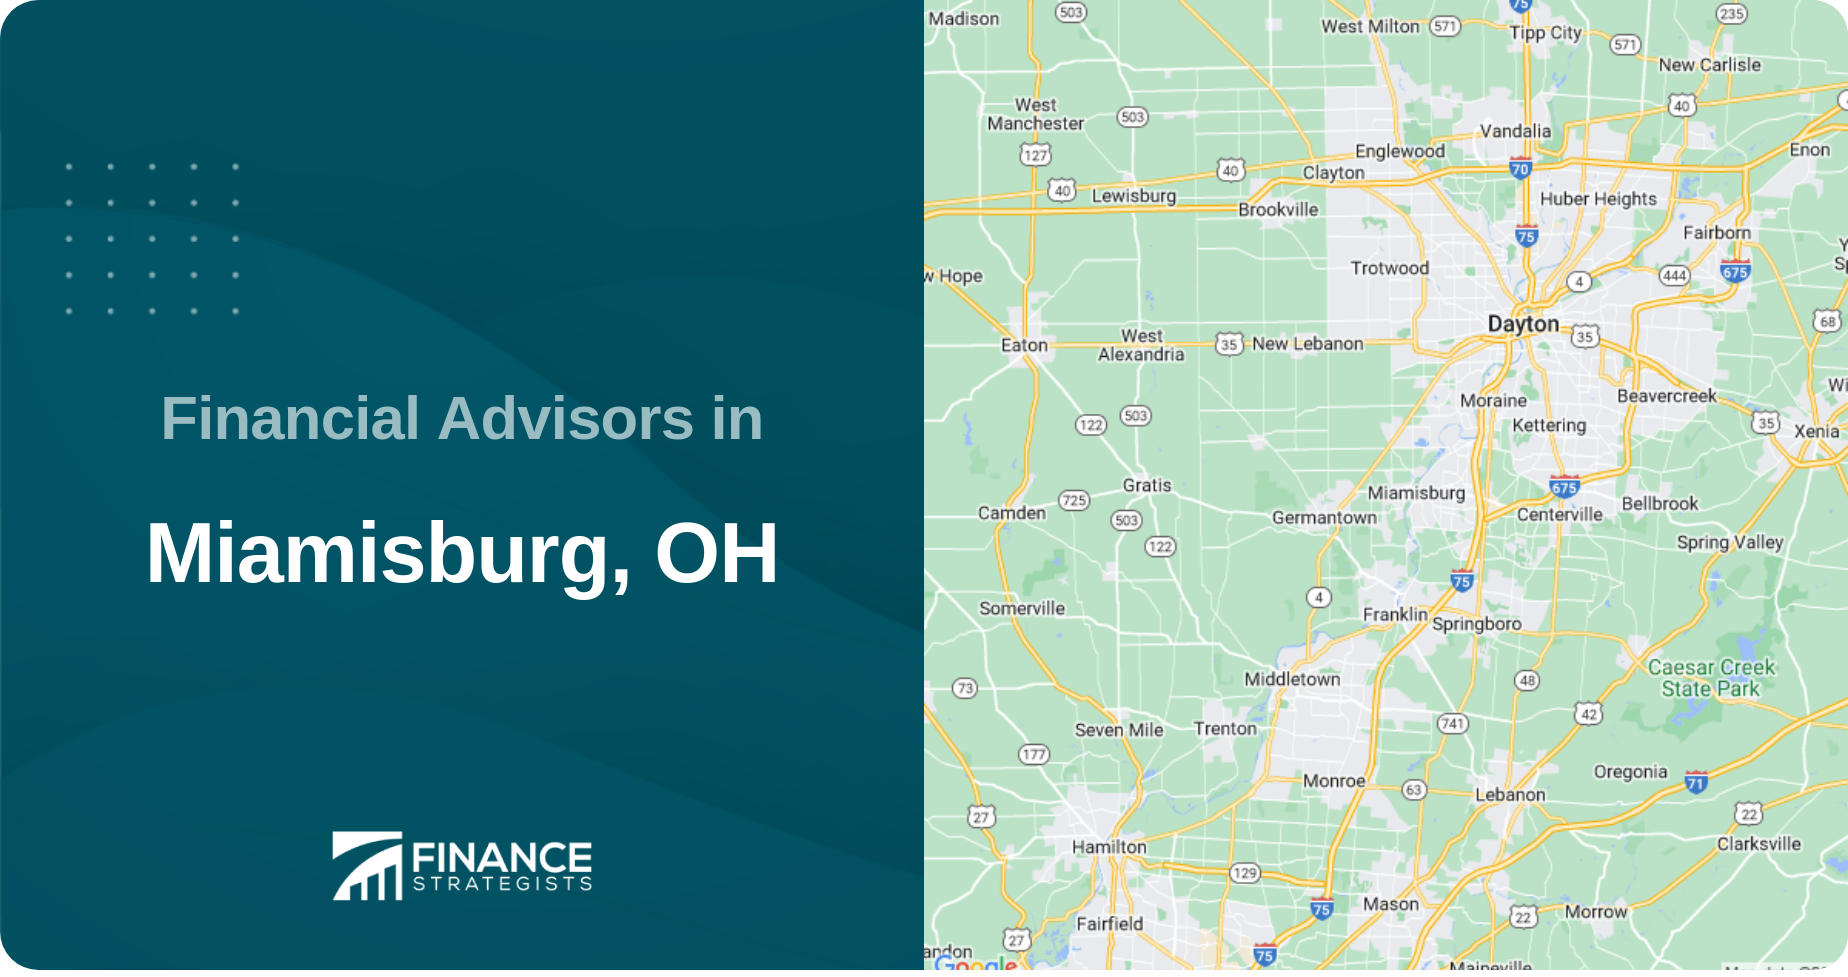 Financial Advisors in Miamisburg, OH